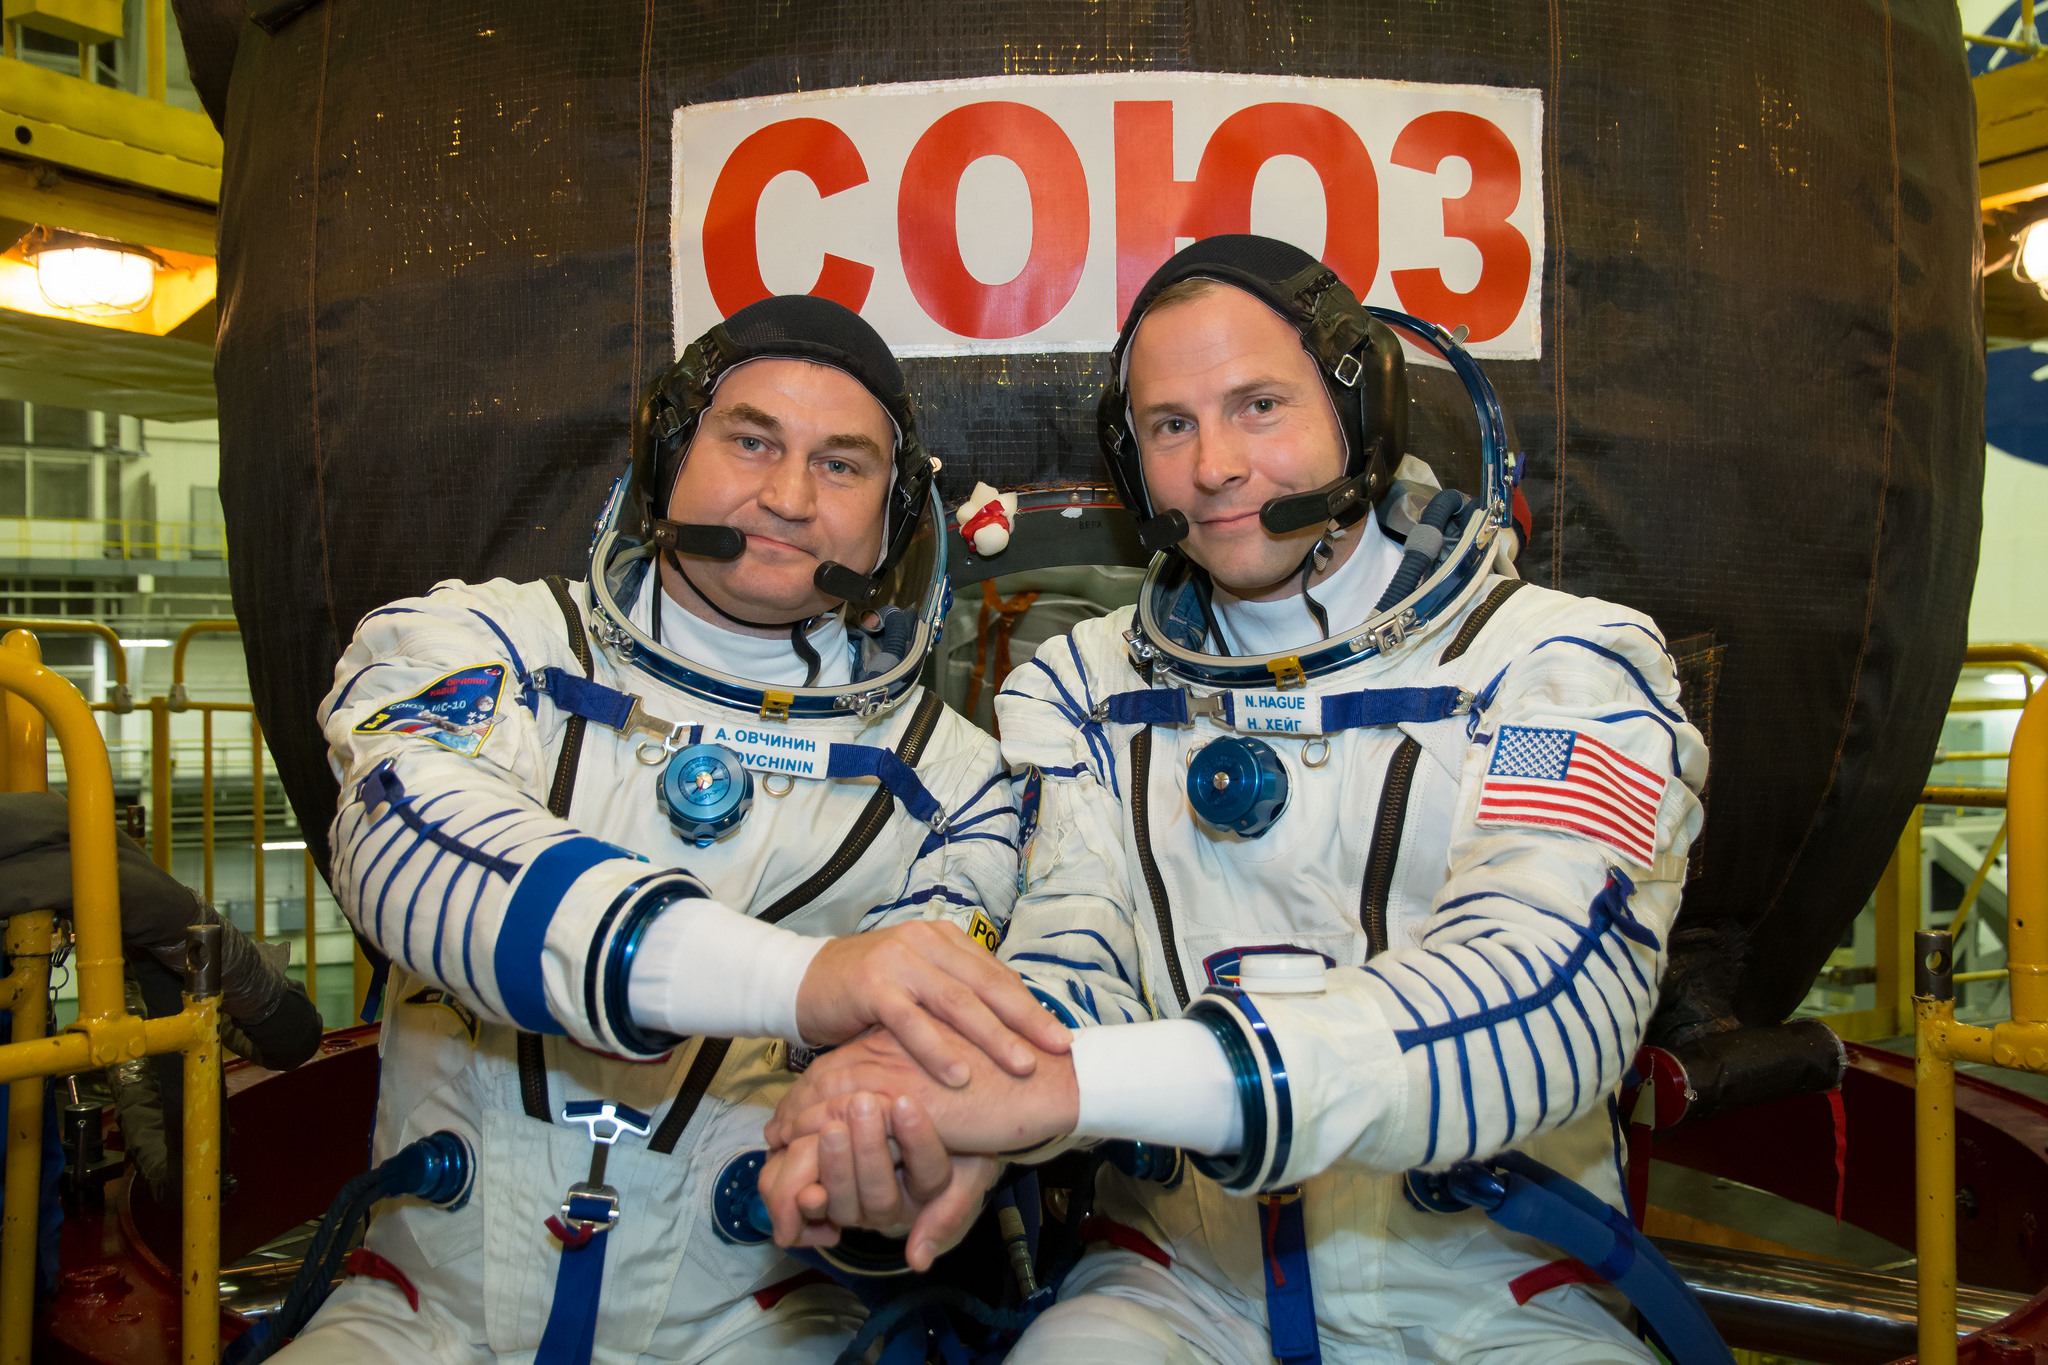 Expedition 57 crew members Alexey Ovchinin of the Russian space agency Roscosmos and Nick Hague of NASA